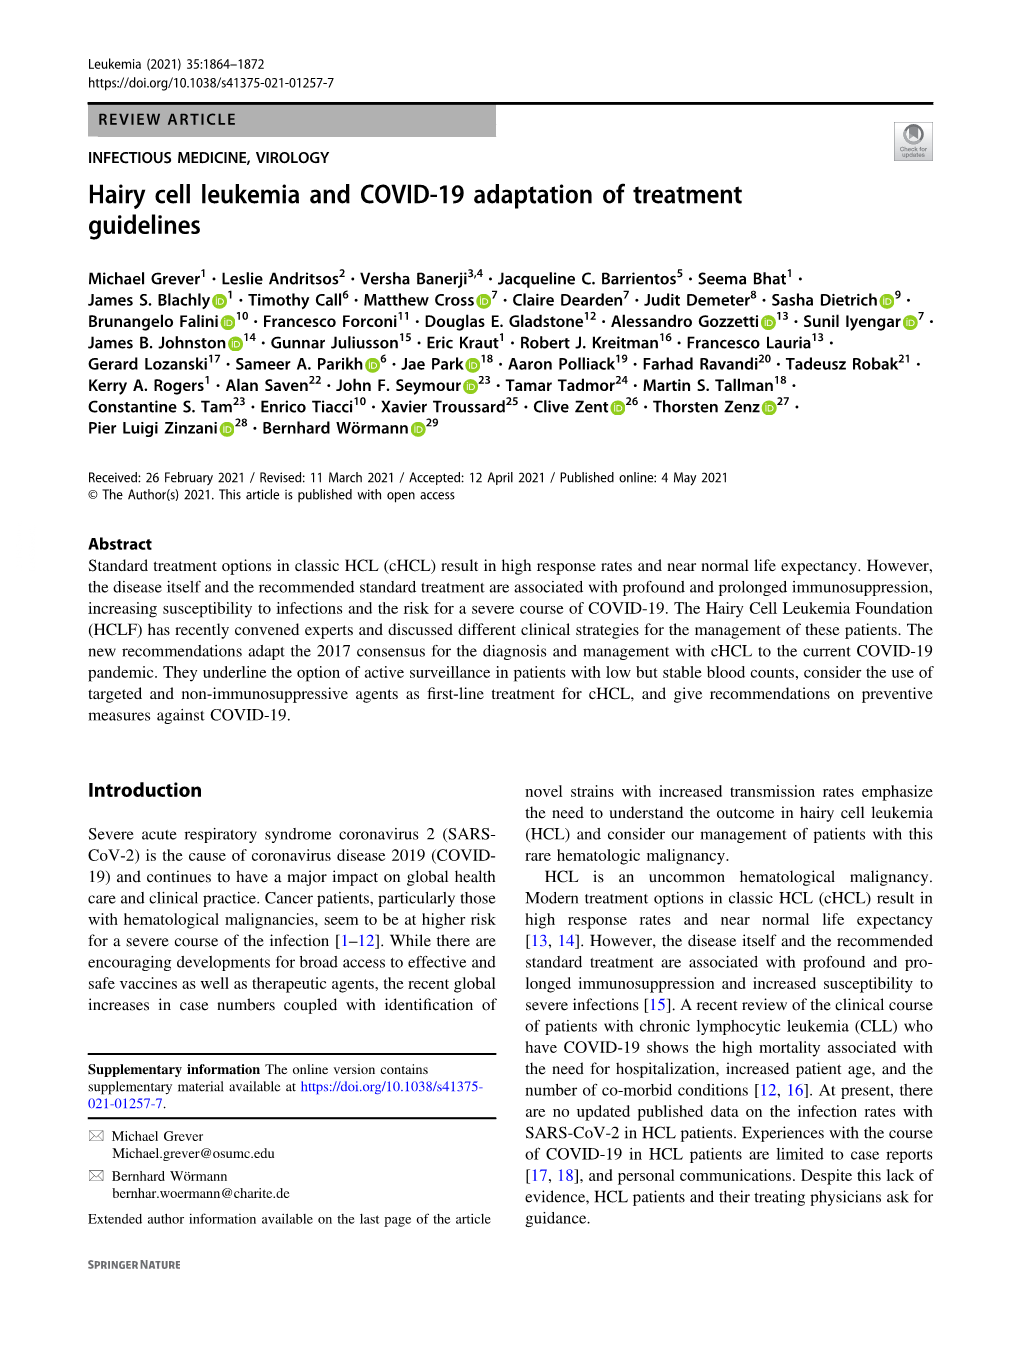 Hairy Cell Leukemia and COVID-19 Adaptation of Treatment Guidelines